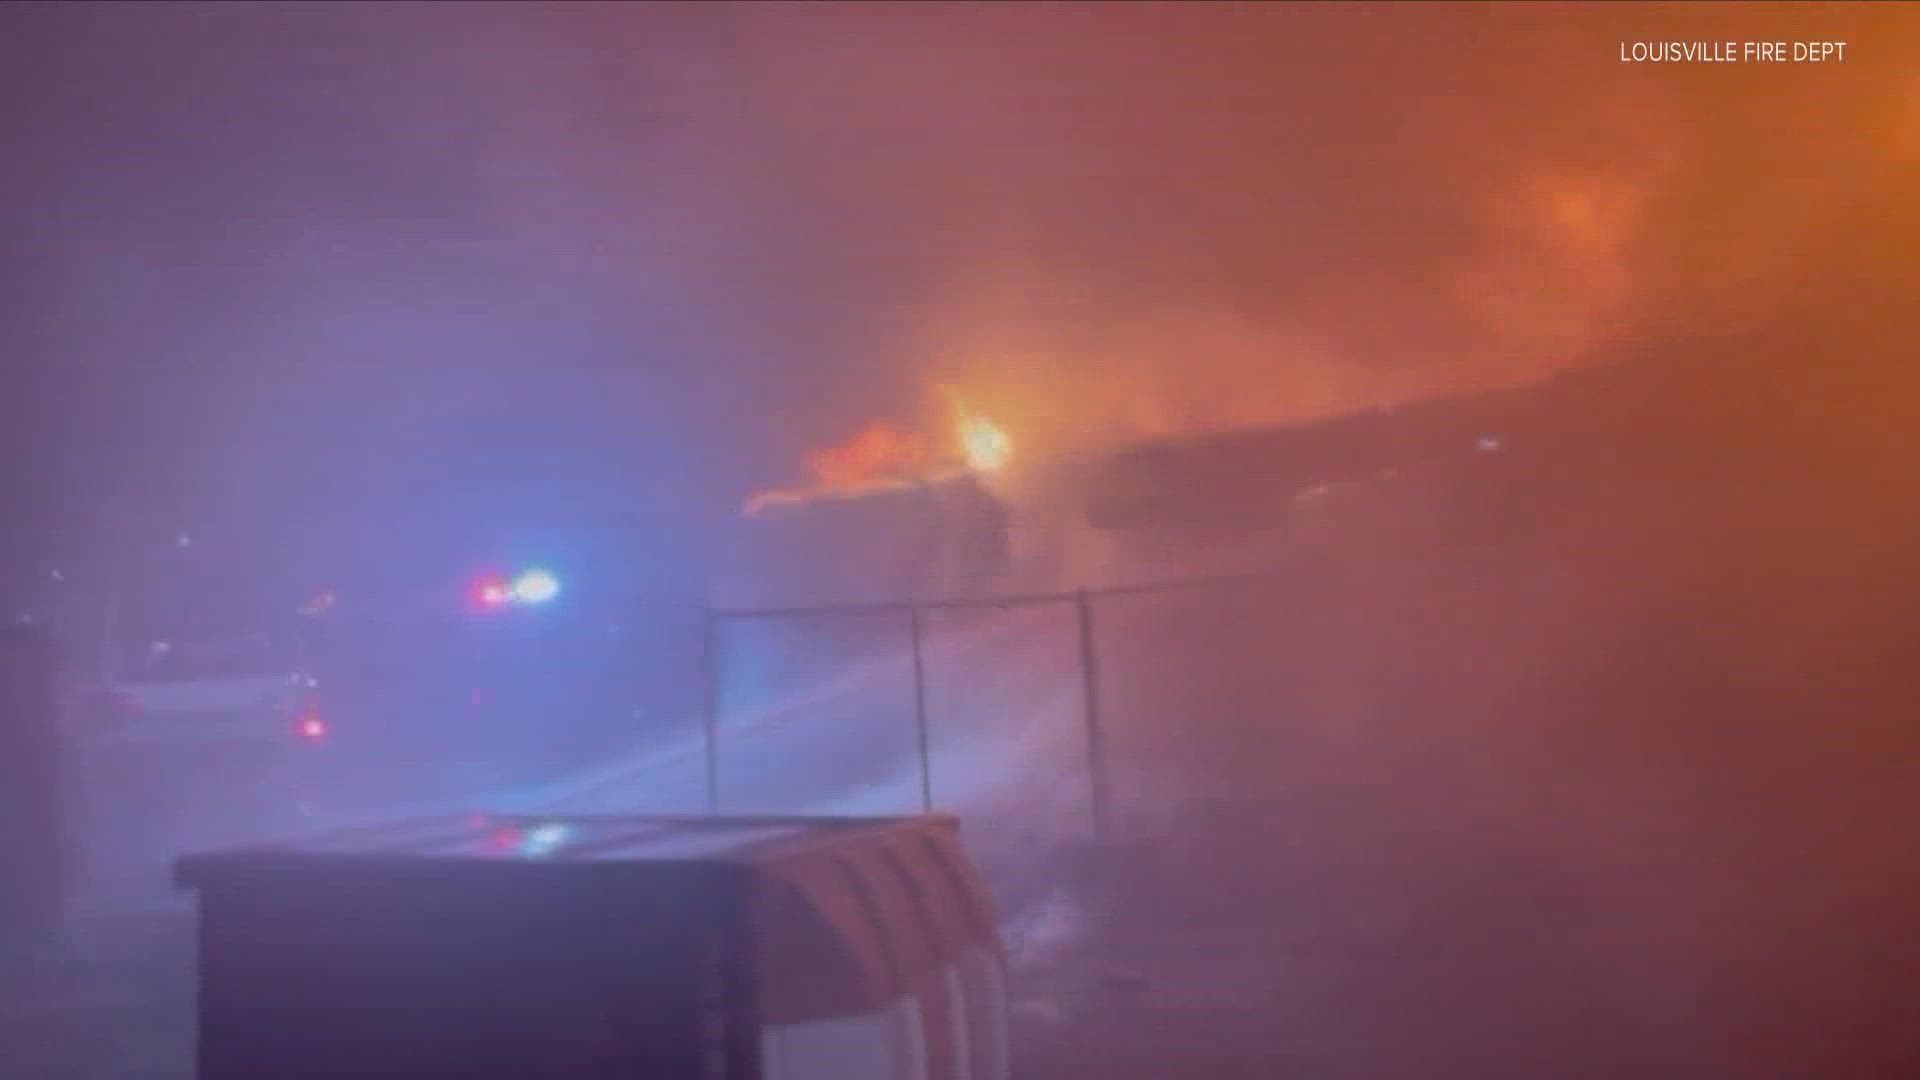 Louisville fire crews said the blaze happened at an abandoned warehouse in the 700 block of East Main Street Saturday evening.